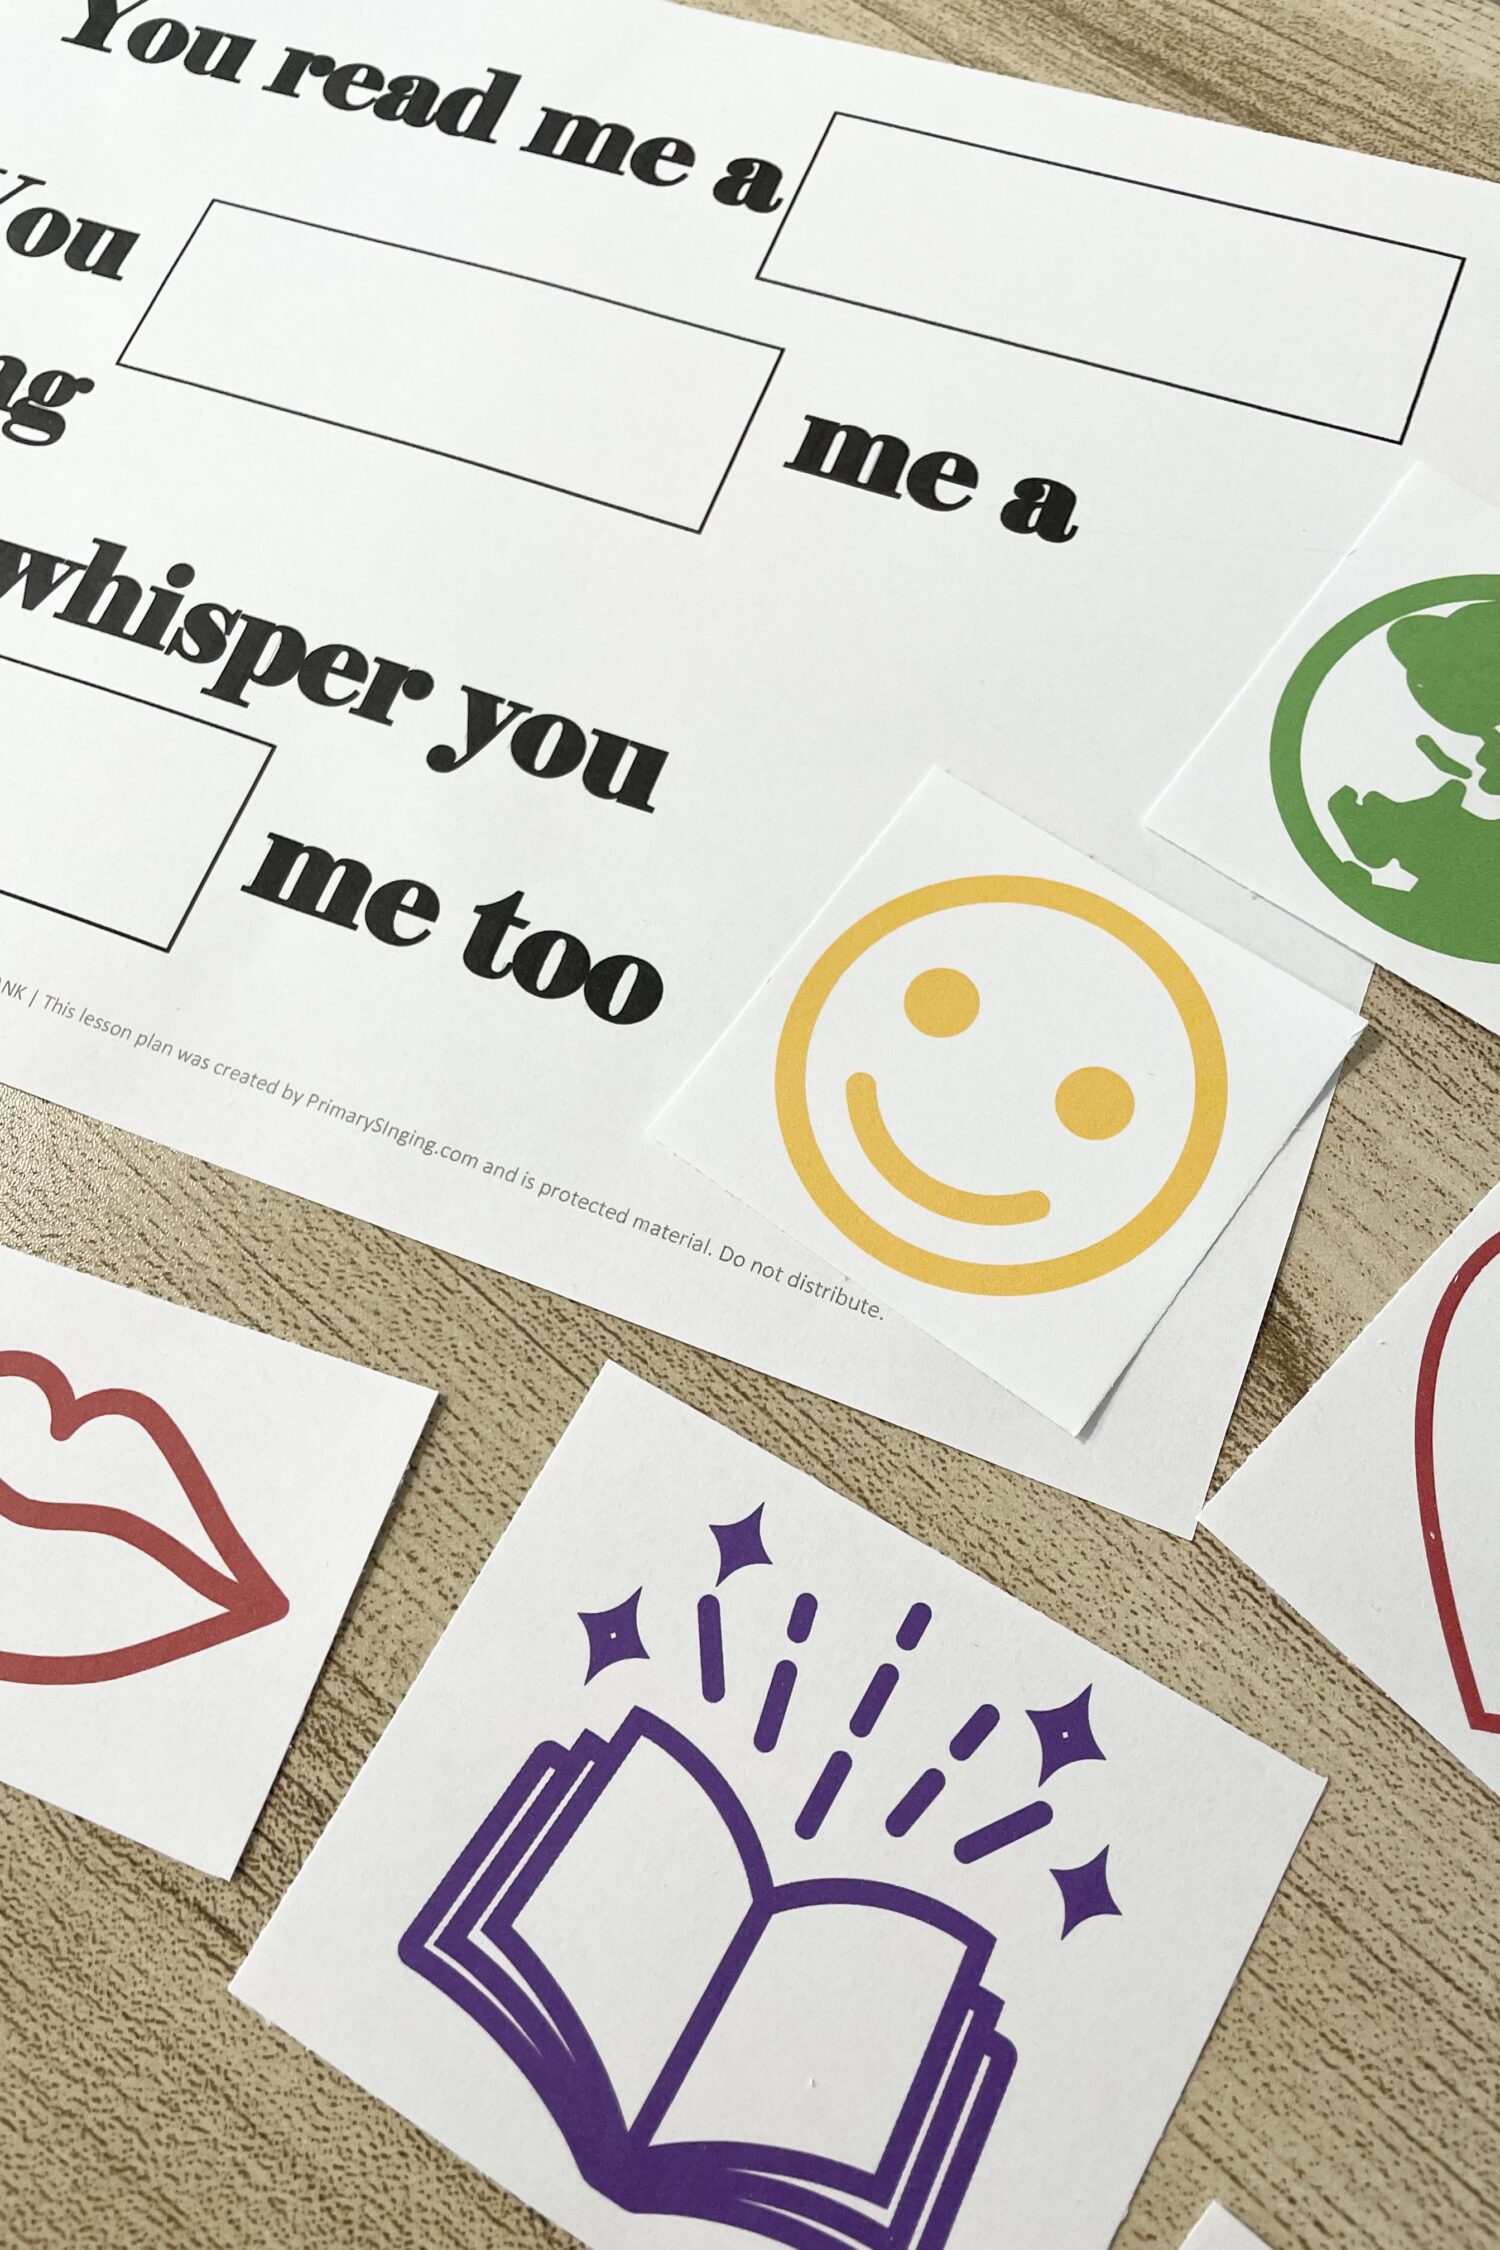 Try this cute Grandmother Primary Song Fill in the Blank word representations activity in singing time to fill in the missing lyrics of this Mother's Day Song for LDS Primary Music Leaders.